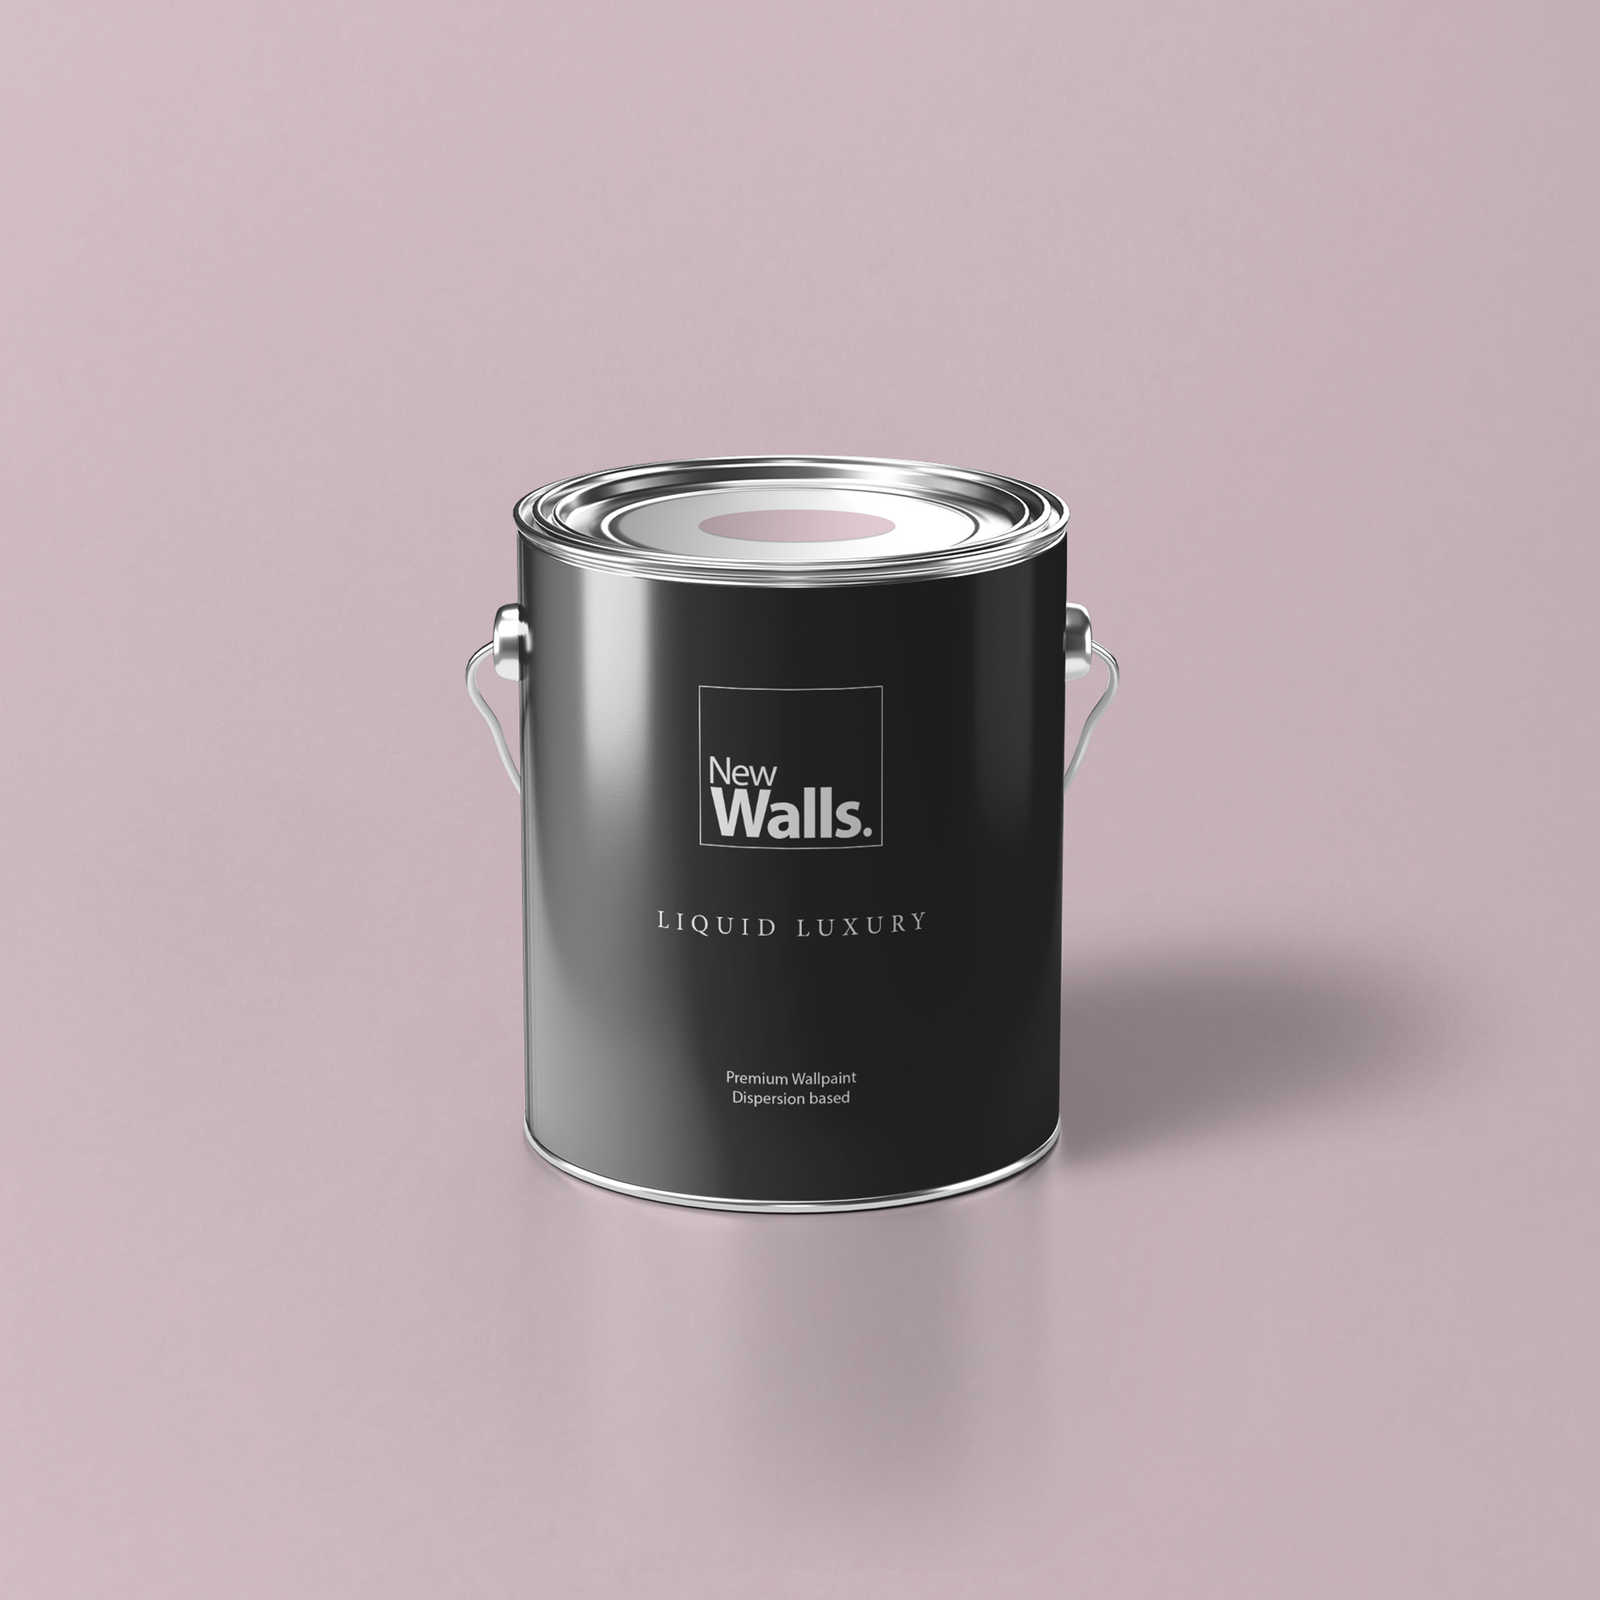 Premium Wall Paint Soothing Old Pink »Beautiful Berry« NW206 – 2.5 litre
